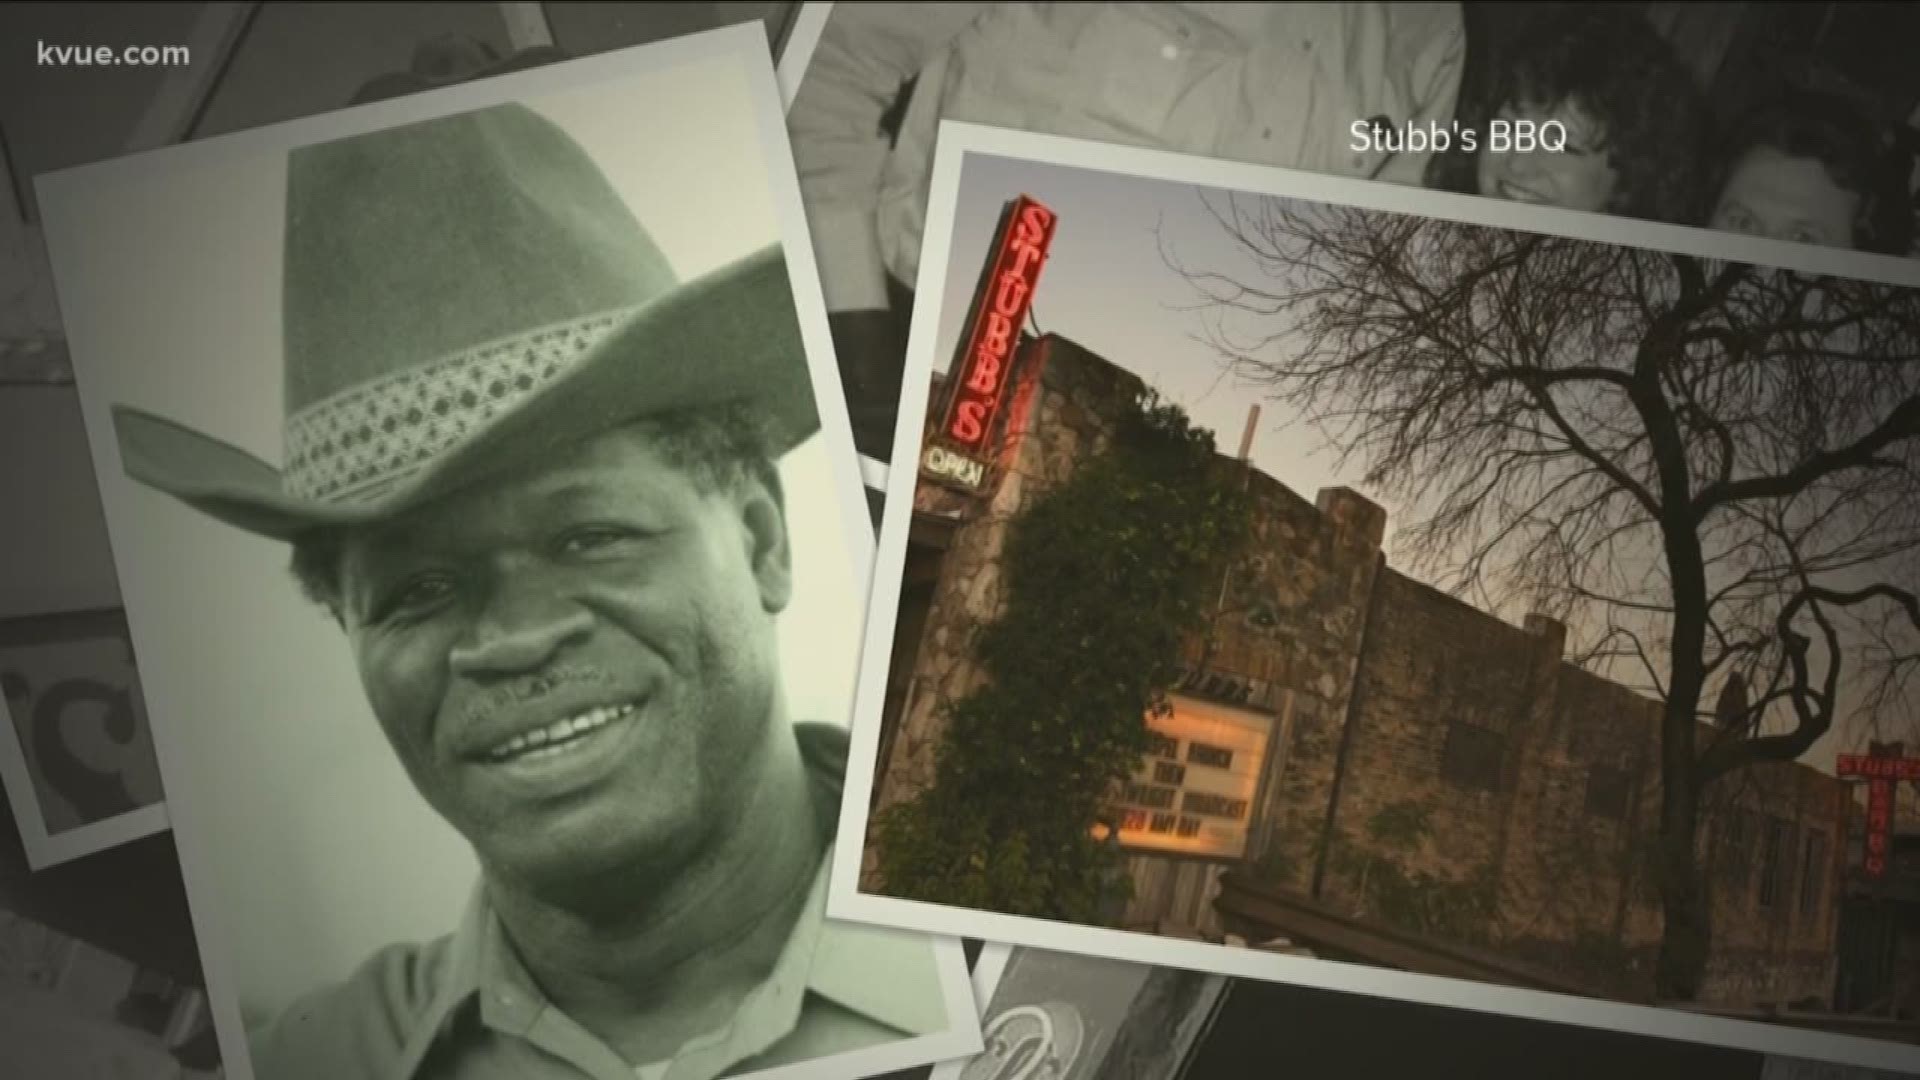 CB Stubblefield, the founder of Stubb's Bar-B-Q in Downtown Austin, is being inducted into the Barbecue Hall of Fame!